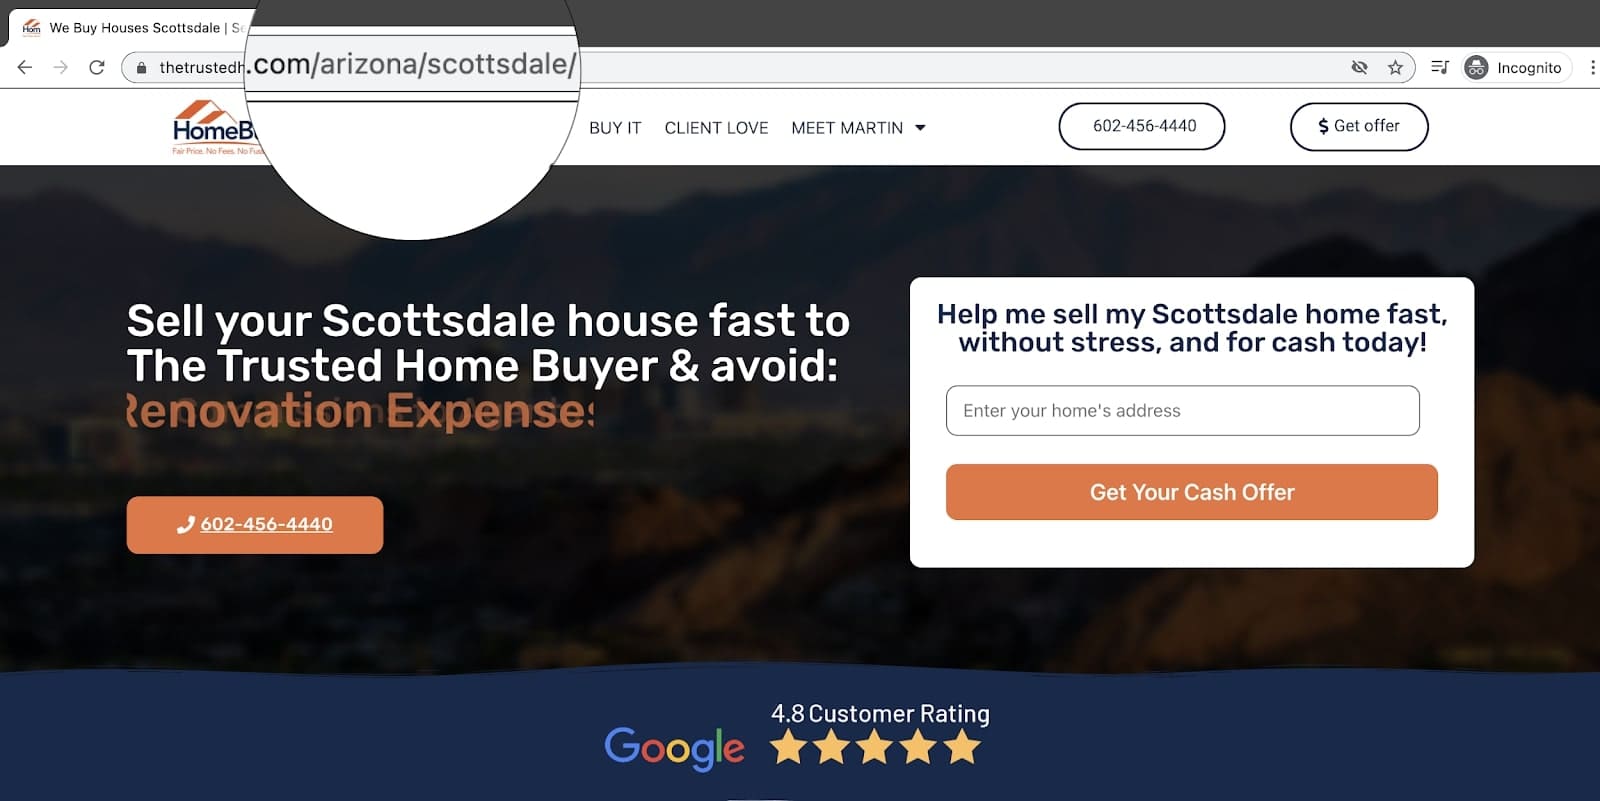 example of a SEO friendly url on a website with domain: www.site/arizona/scottsdale